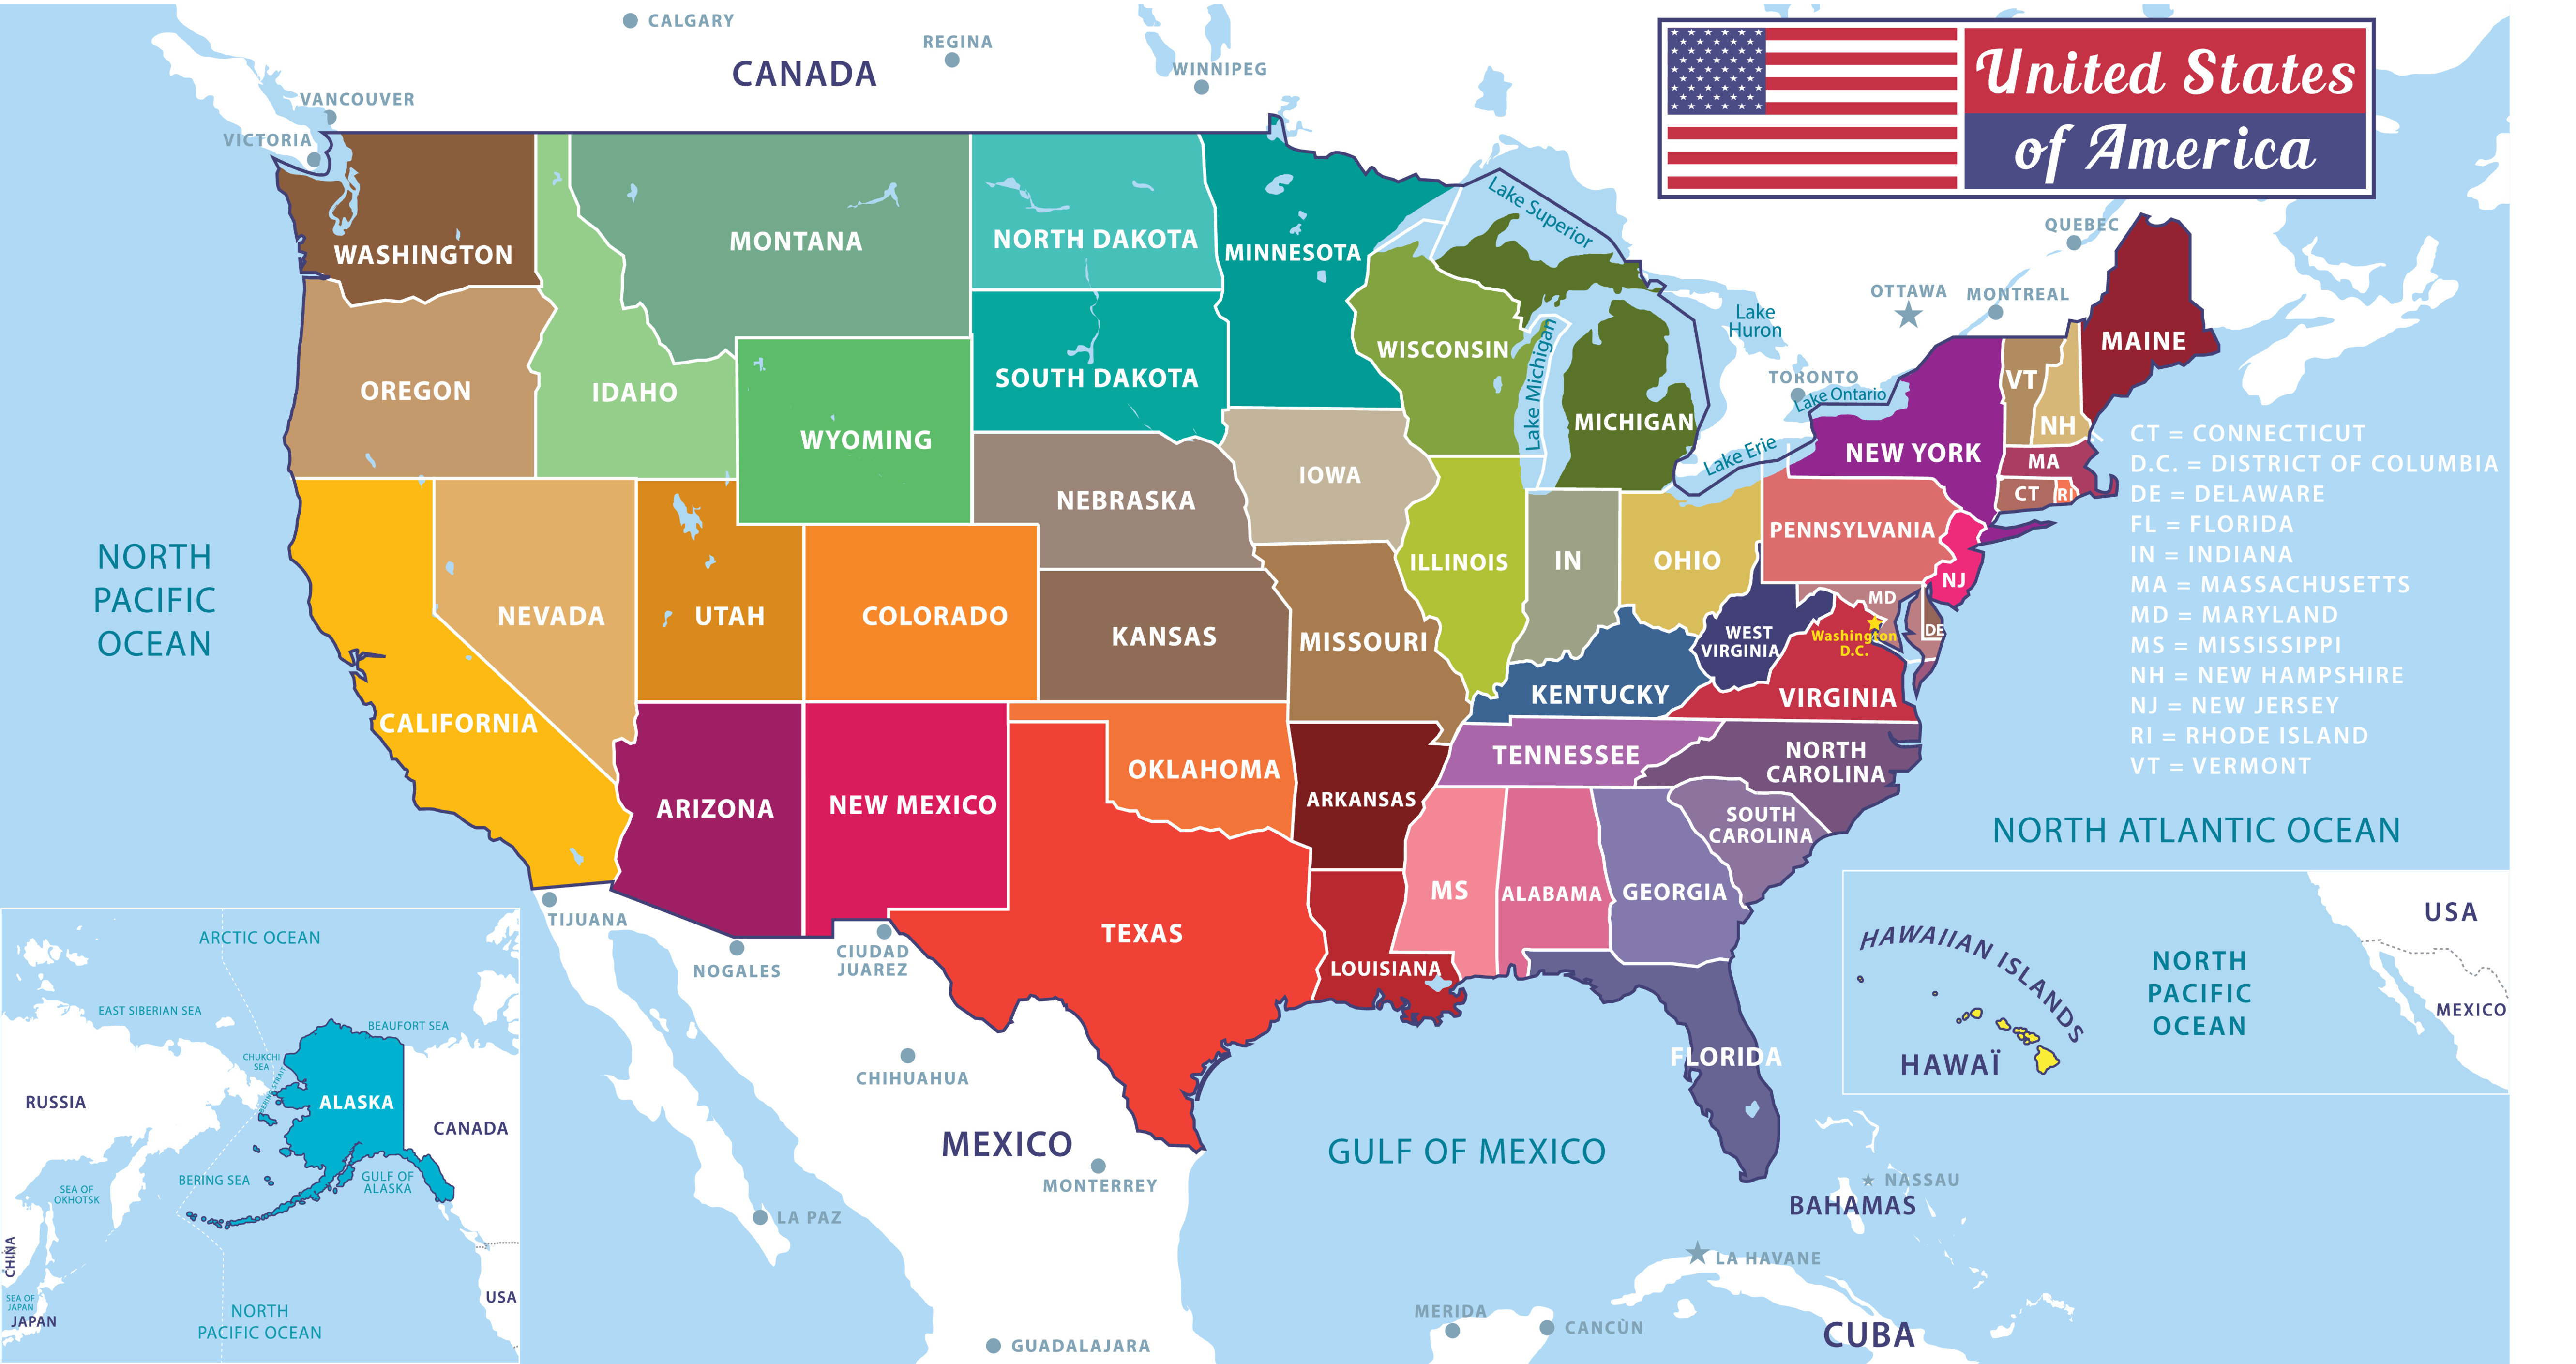 MAP(United States of America)